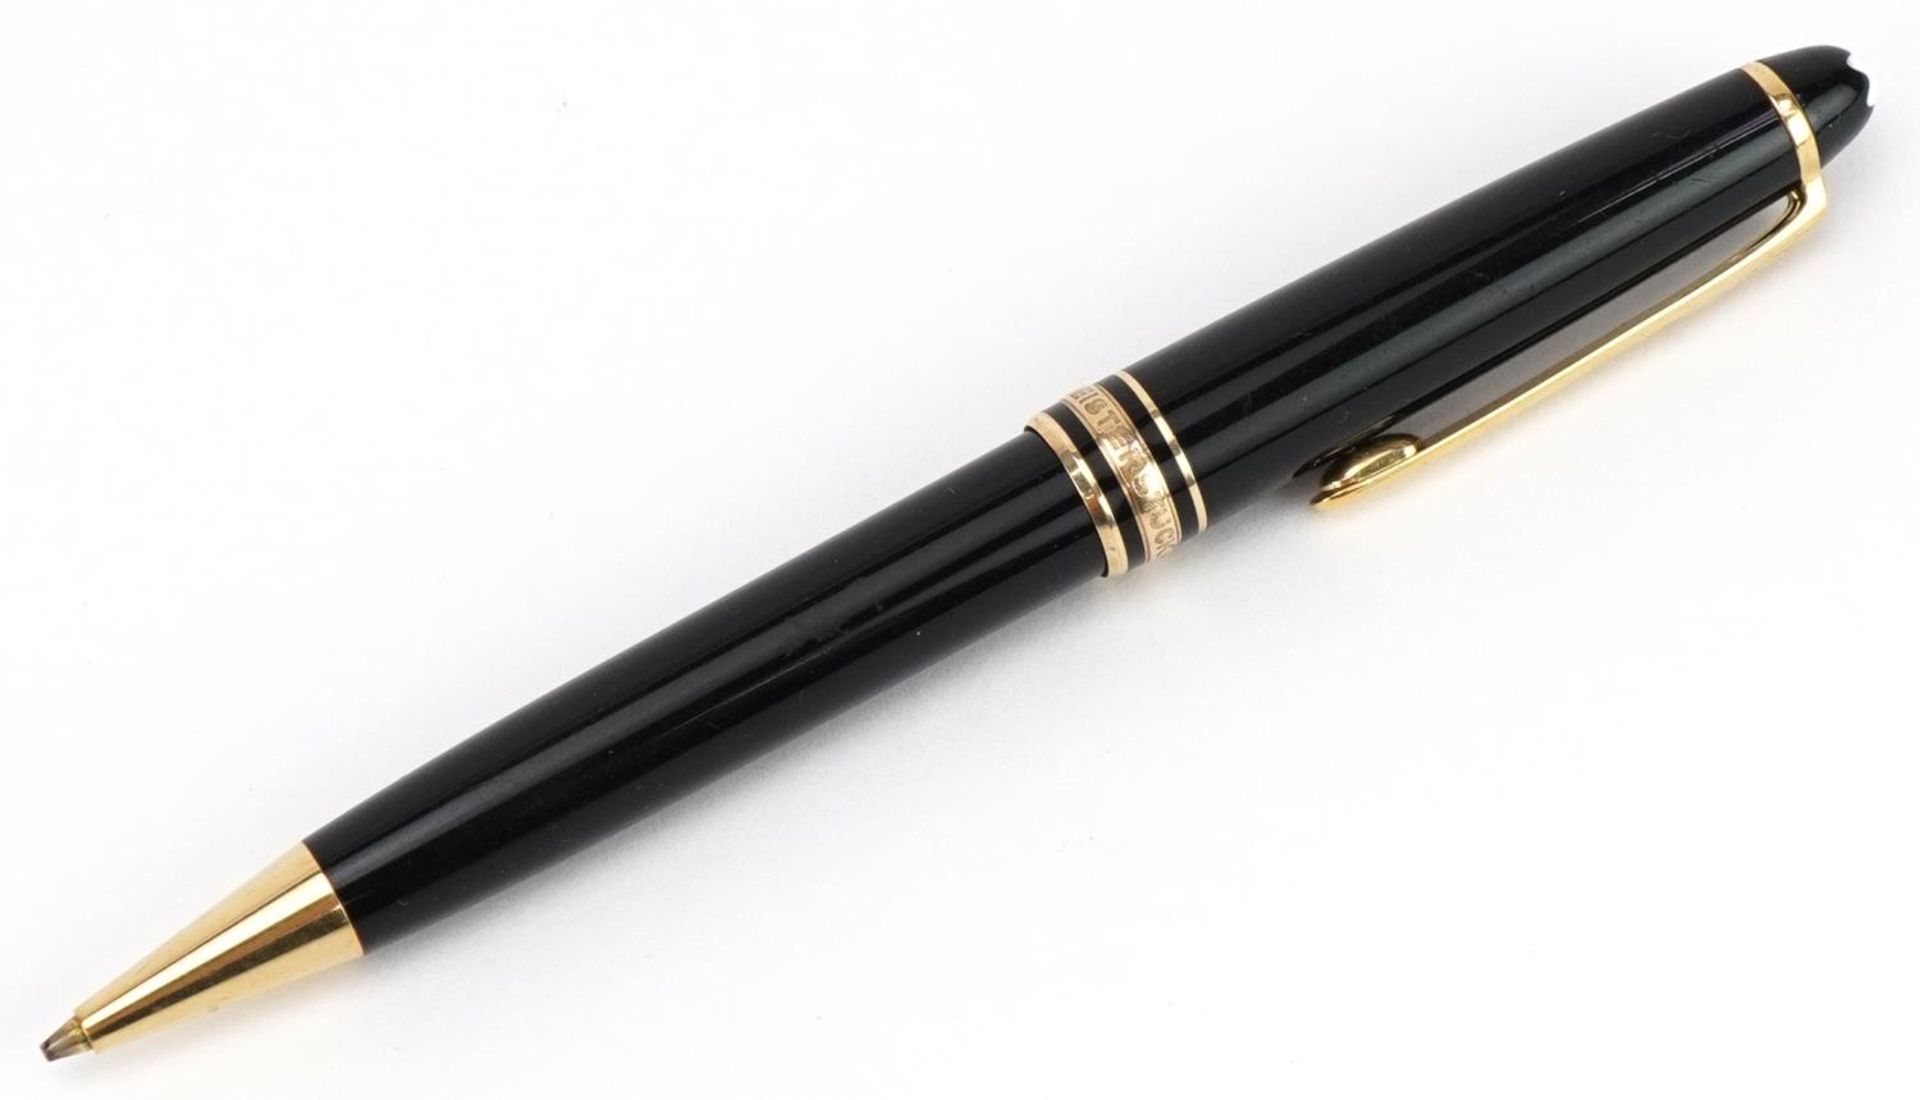 Vintage Montblanc Meisterstuck propelling pencil : For further information on this lot please